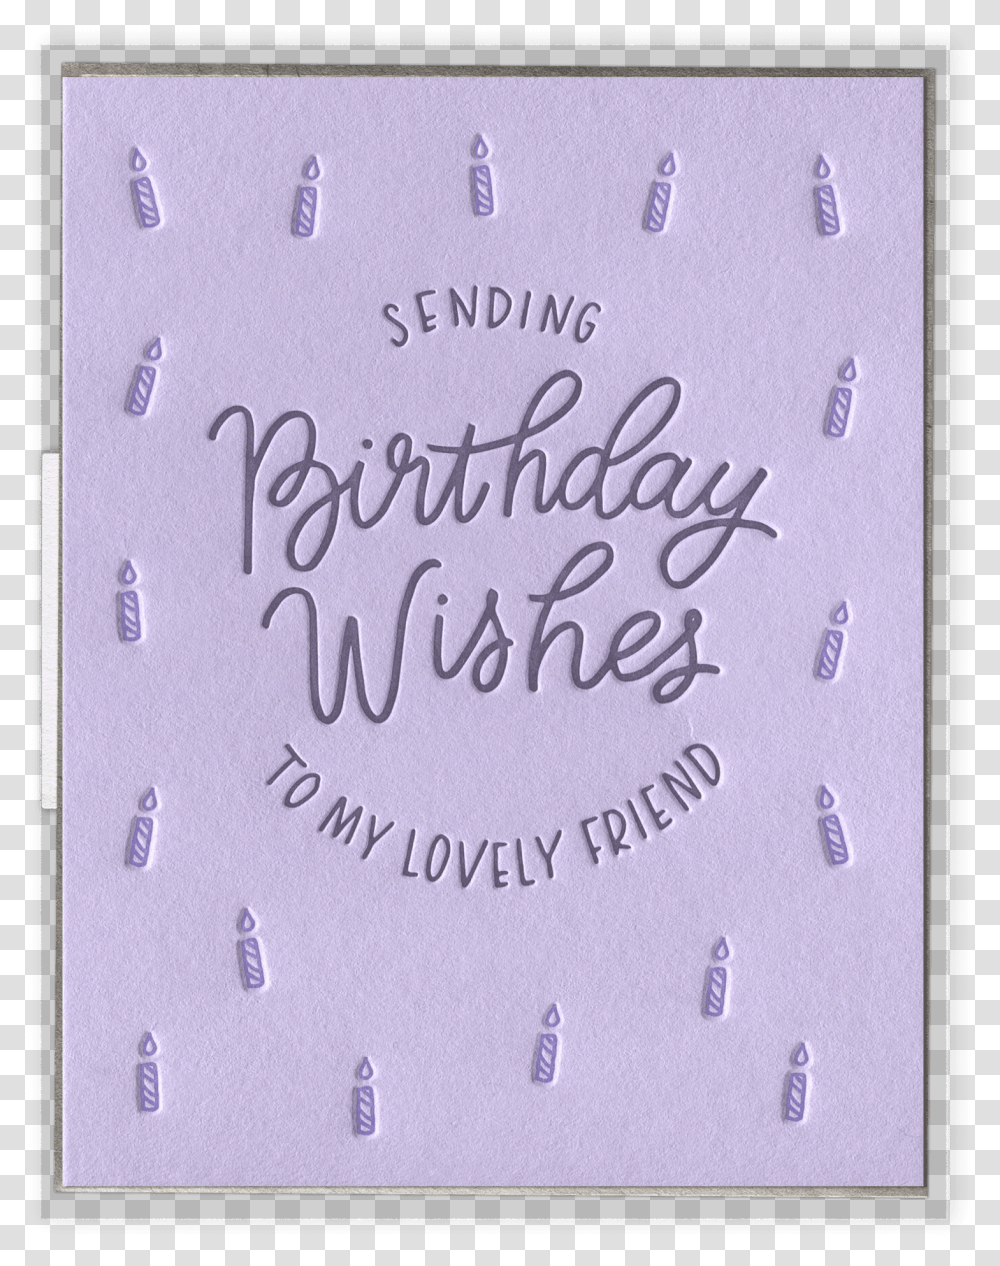 Lovely Birthday Wishes Letterpress Greeting Card Construction Paper, Handwriting, Calligraphy, Mobile Phone Transparent Png